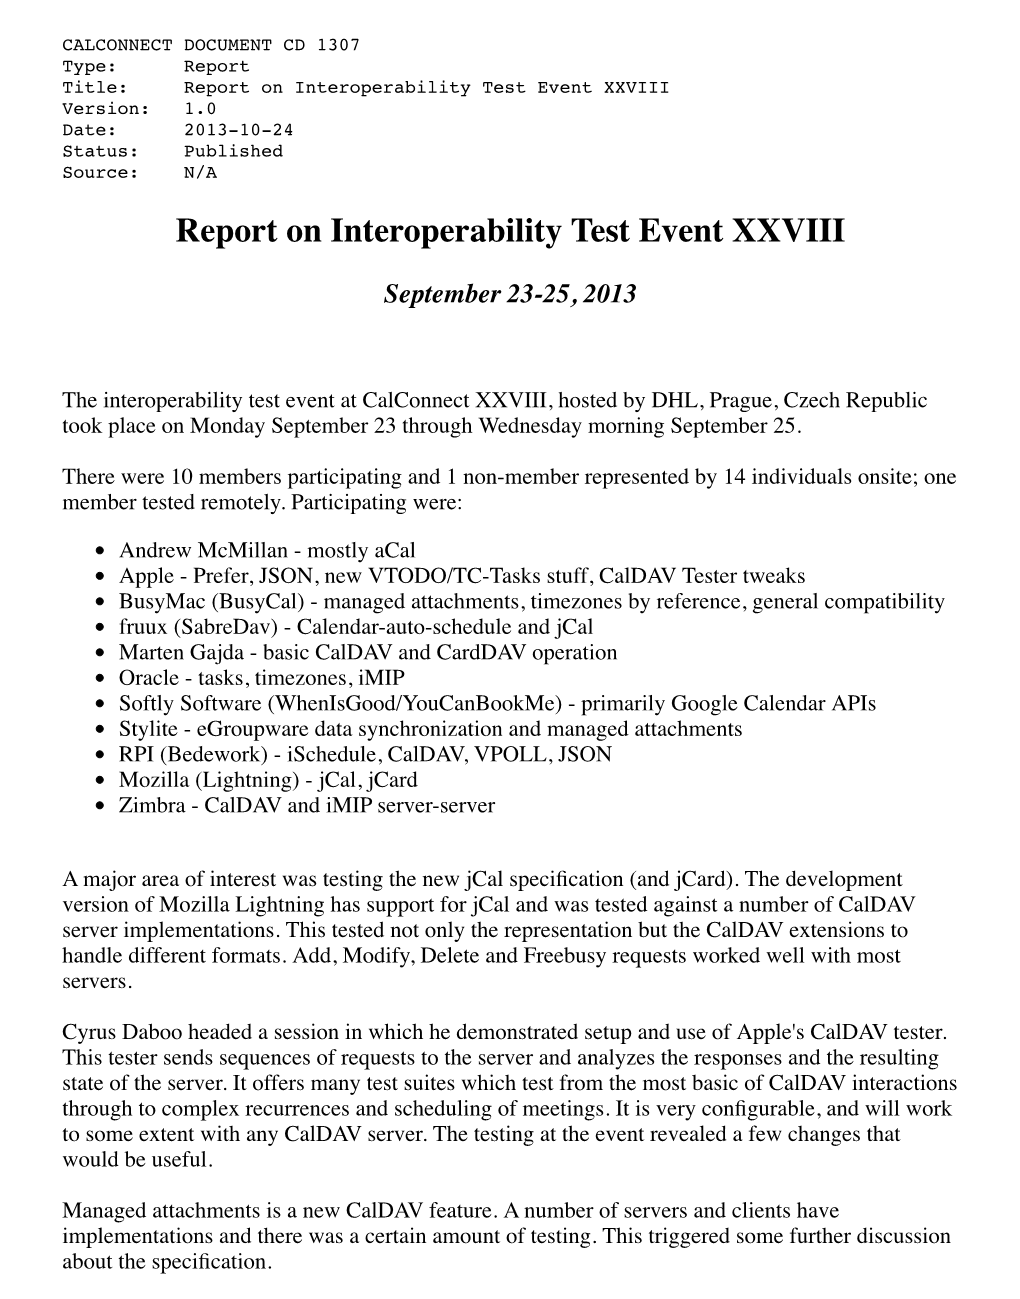 Report on Interoperability Test Event XXVIII Version: 1.0 Date: 2013-10-24 Status: Published Source: N/A Report on Interoperability Test Event XXVIII